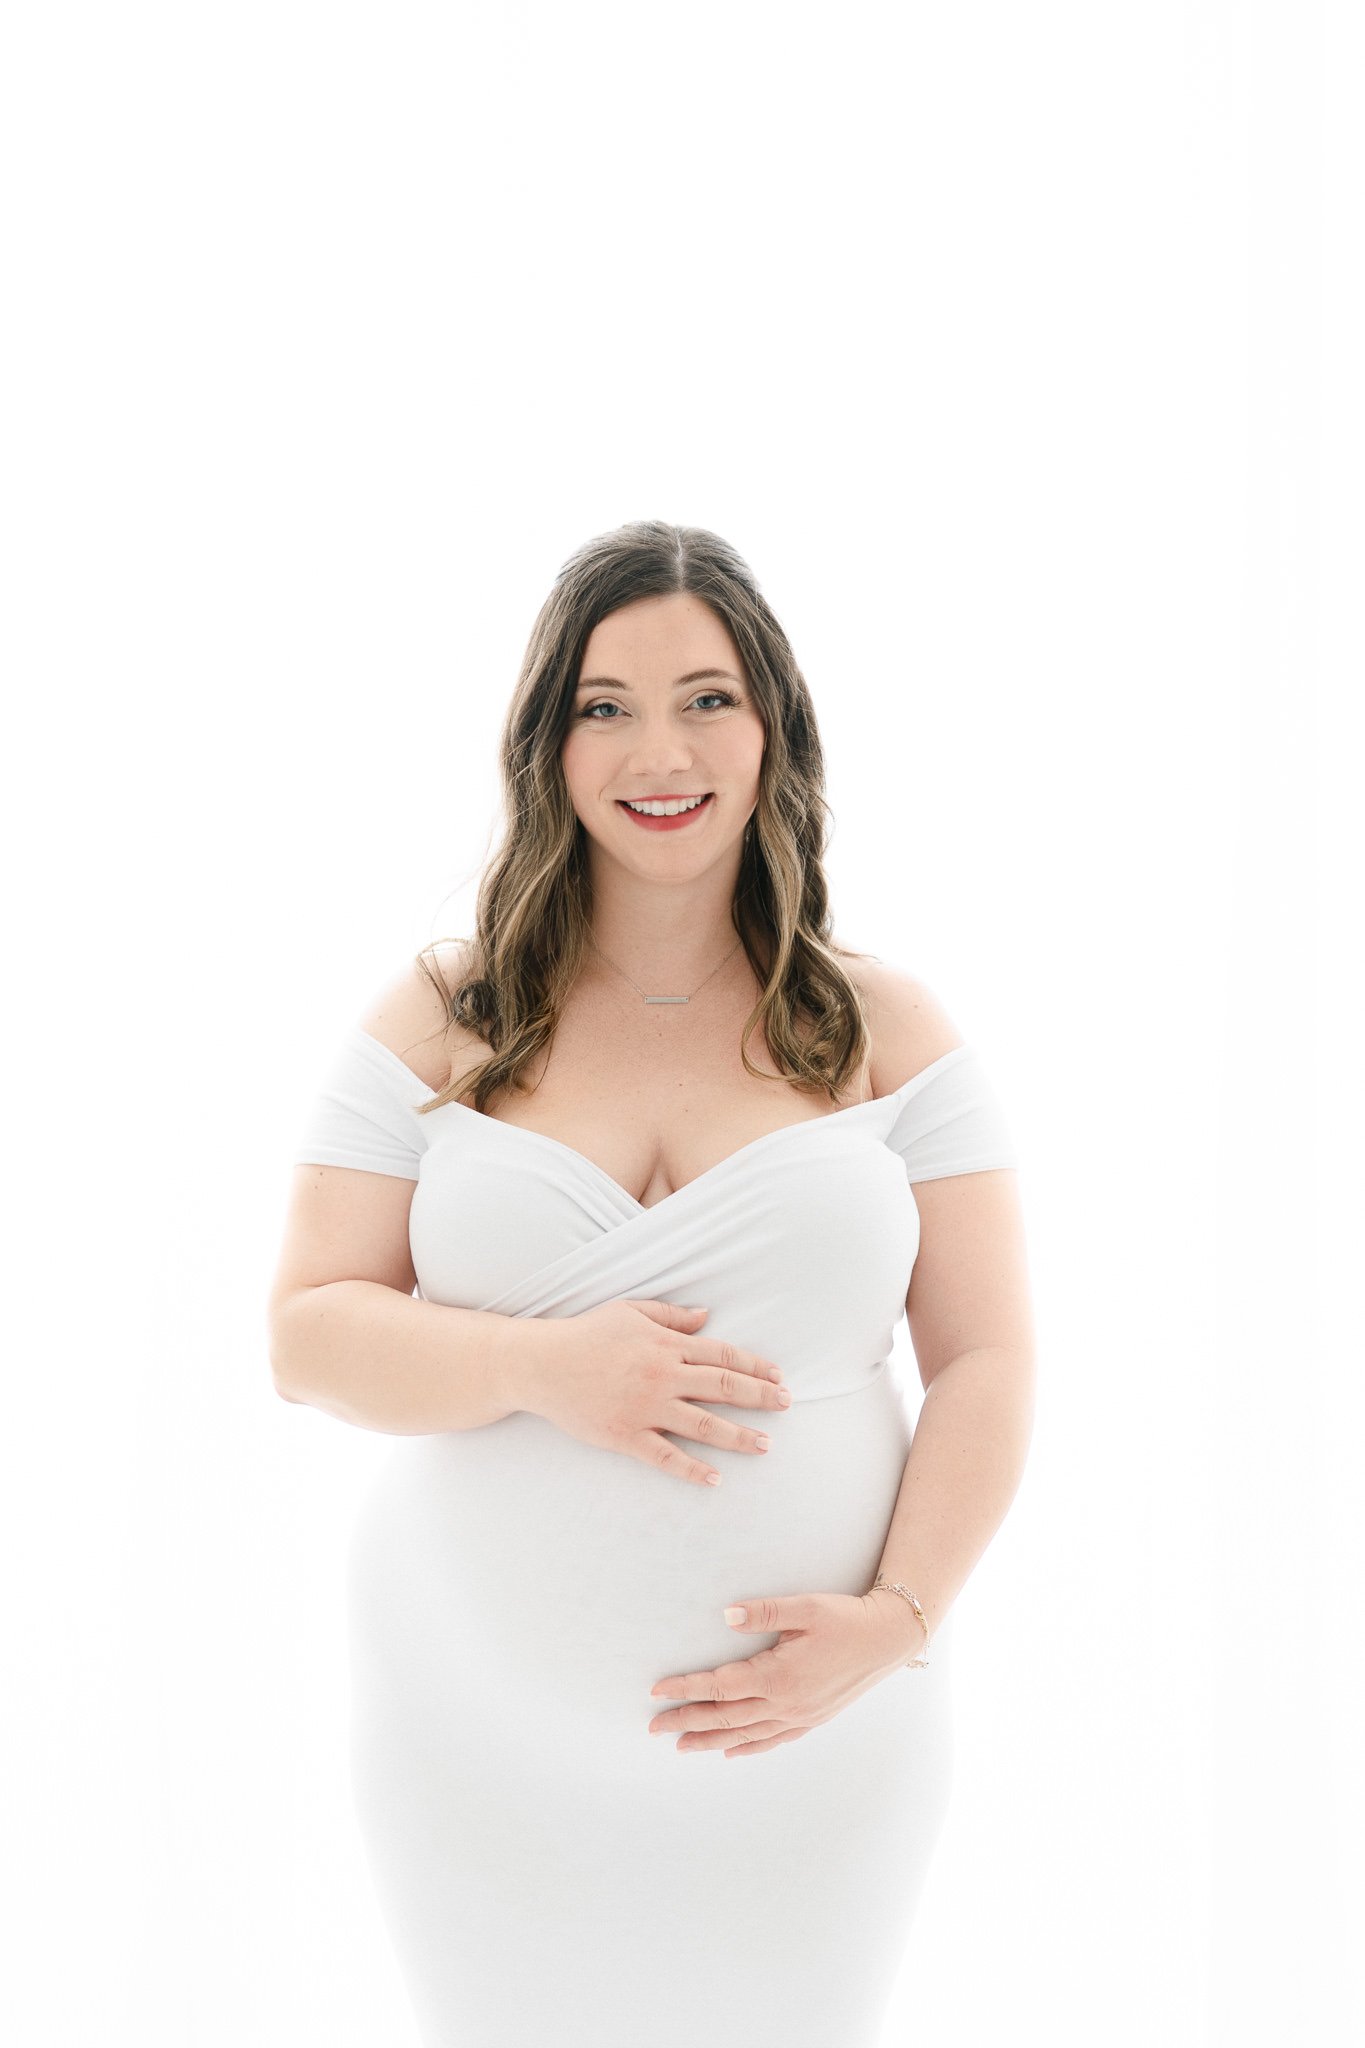  Stretchy white maternity dress on a beautiful glowing mother captured by Nicole Hawkins Photography. stretchy maternity dress glowing mother #NicoleHawkinsPhotography #NicoleHawkinsMaternity #Babyontheway #studiomaternityNJ #whitestudiomaternityport